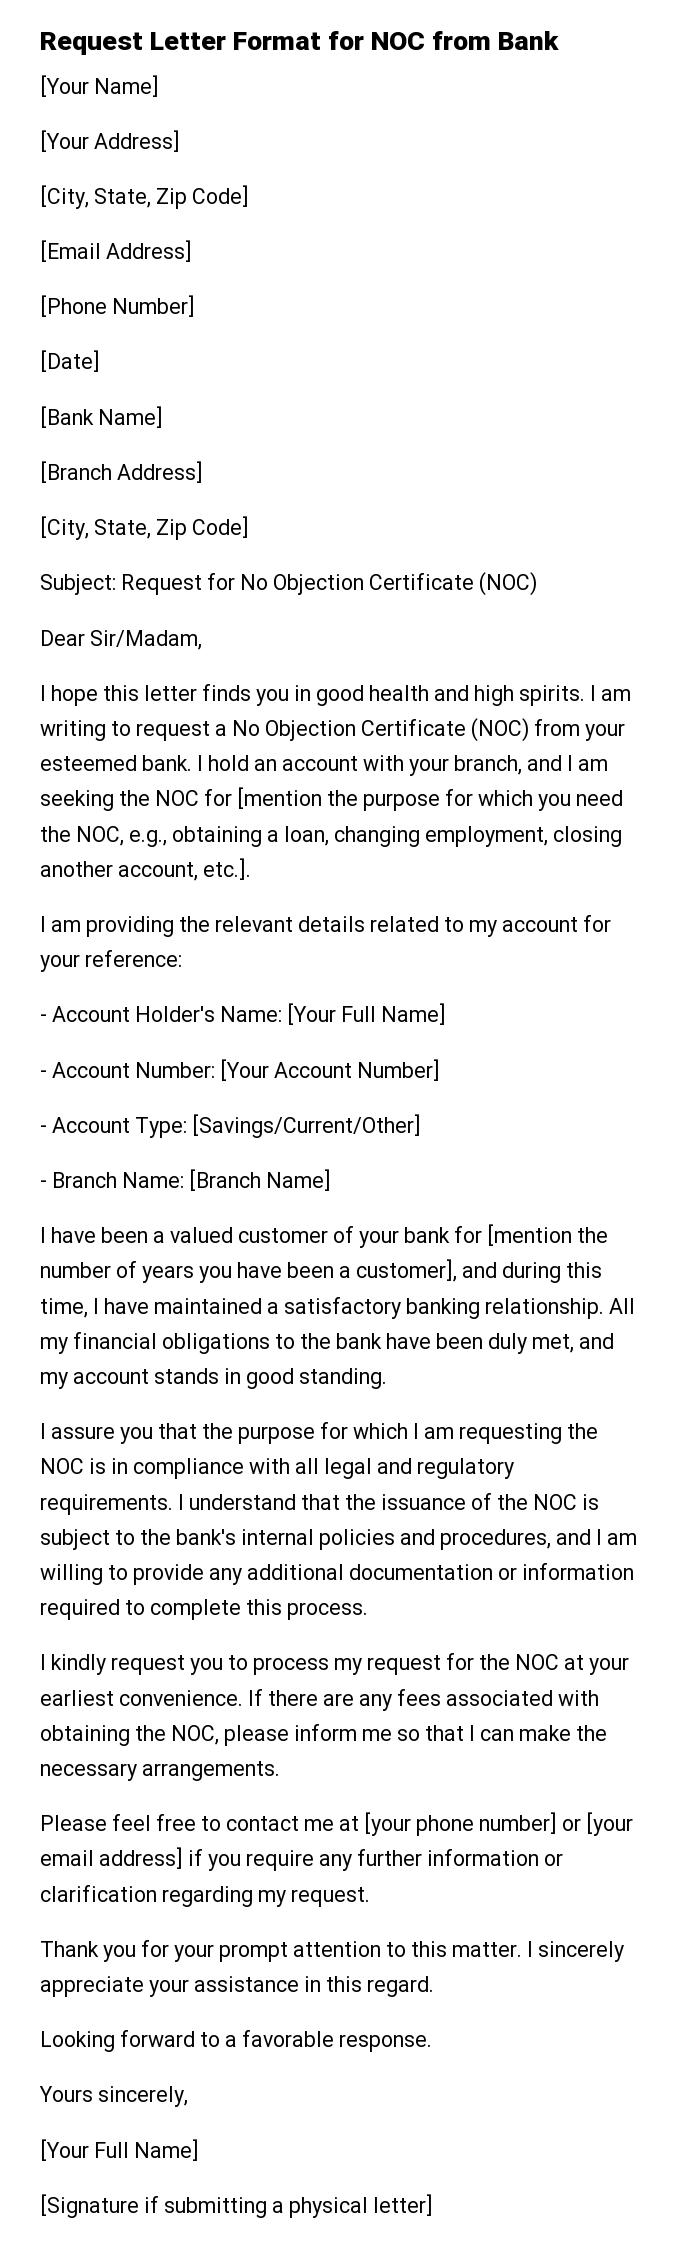 Request Letter Format for NOC from Bank